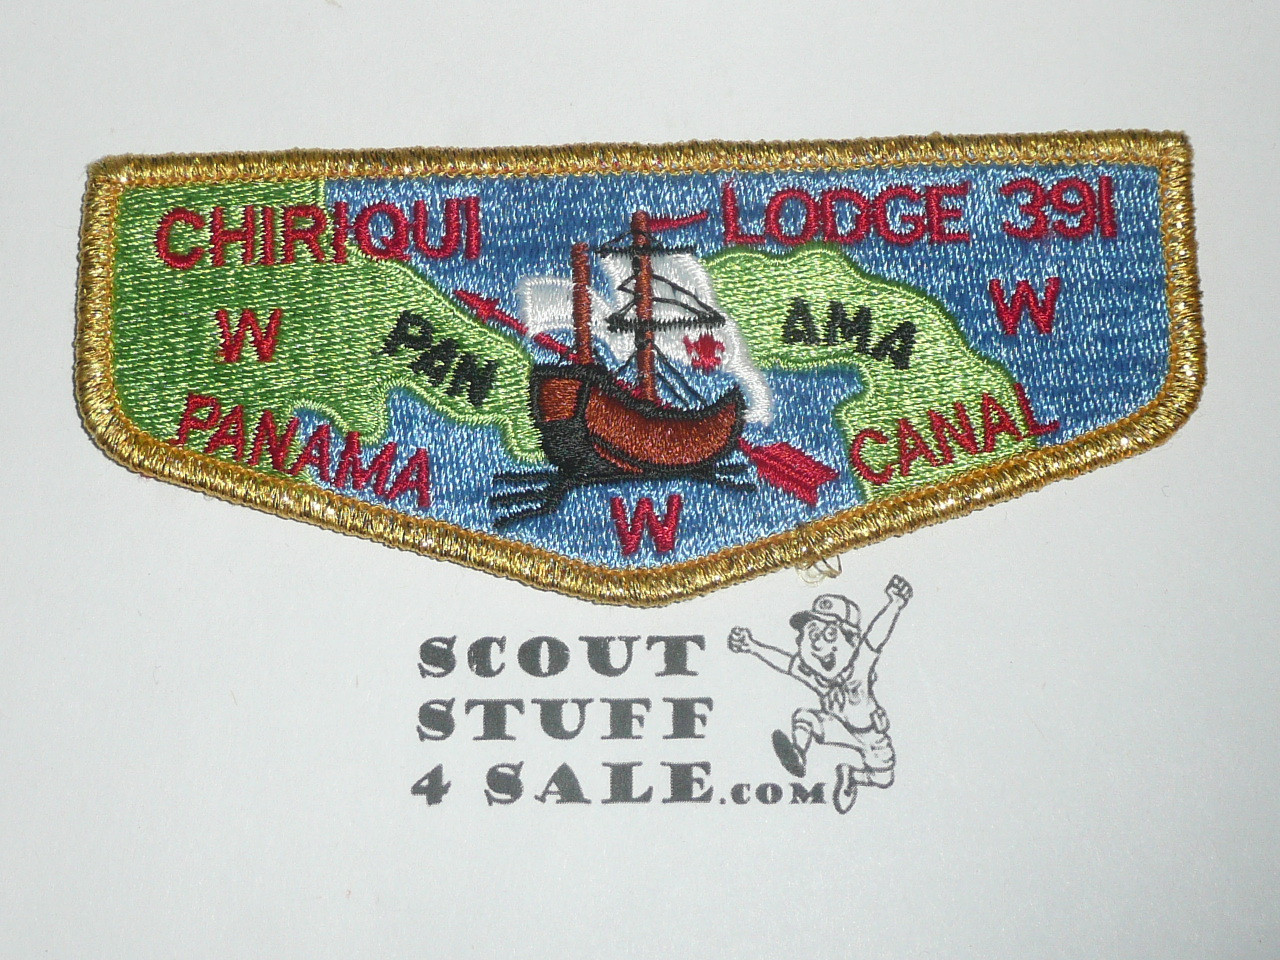 Order of the Arrow Lodge #391 Chiriqui s24 Flap Patch